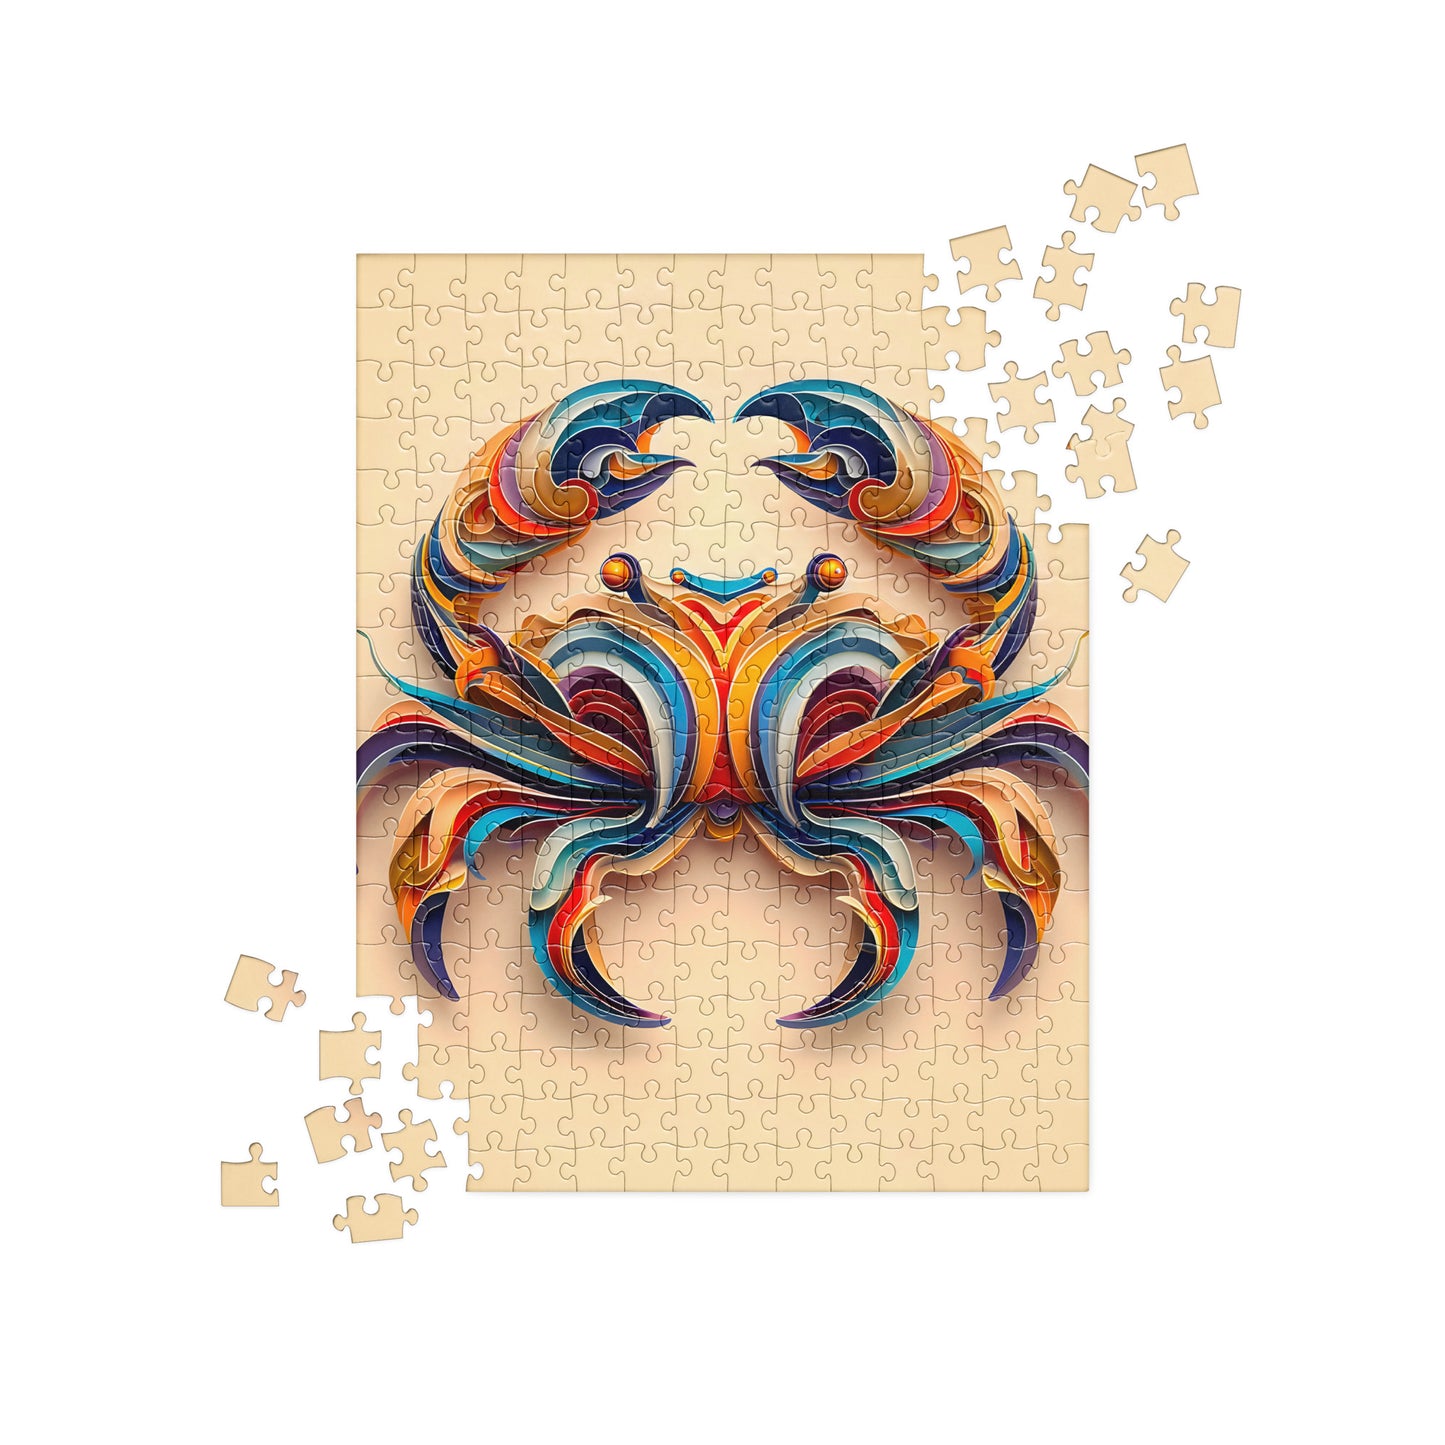 Beautiful 3D Animals and Birds - Jigsaw Puzzle #5